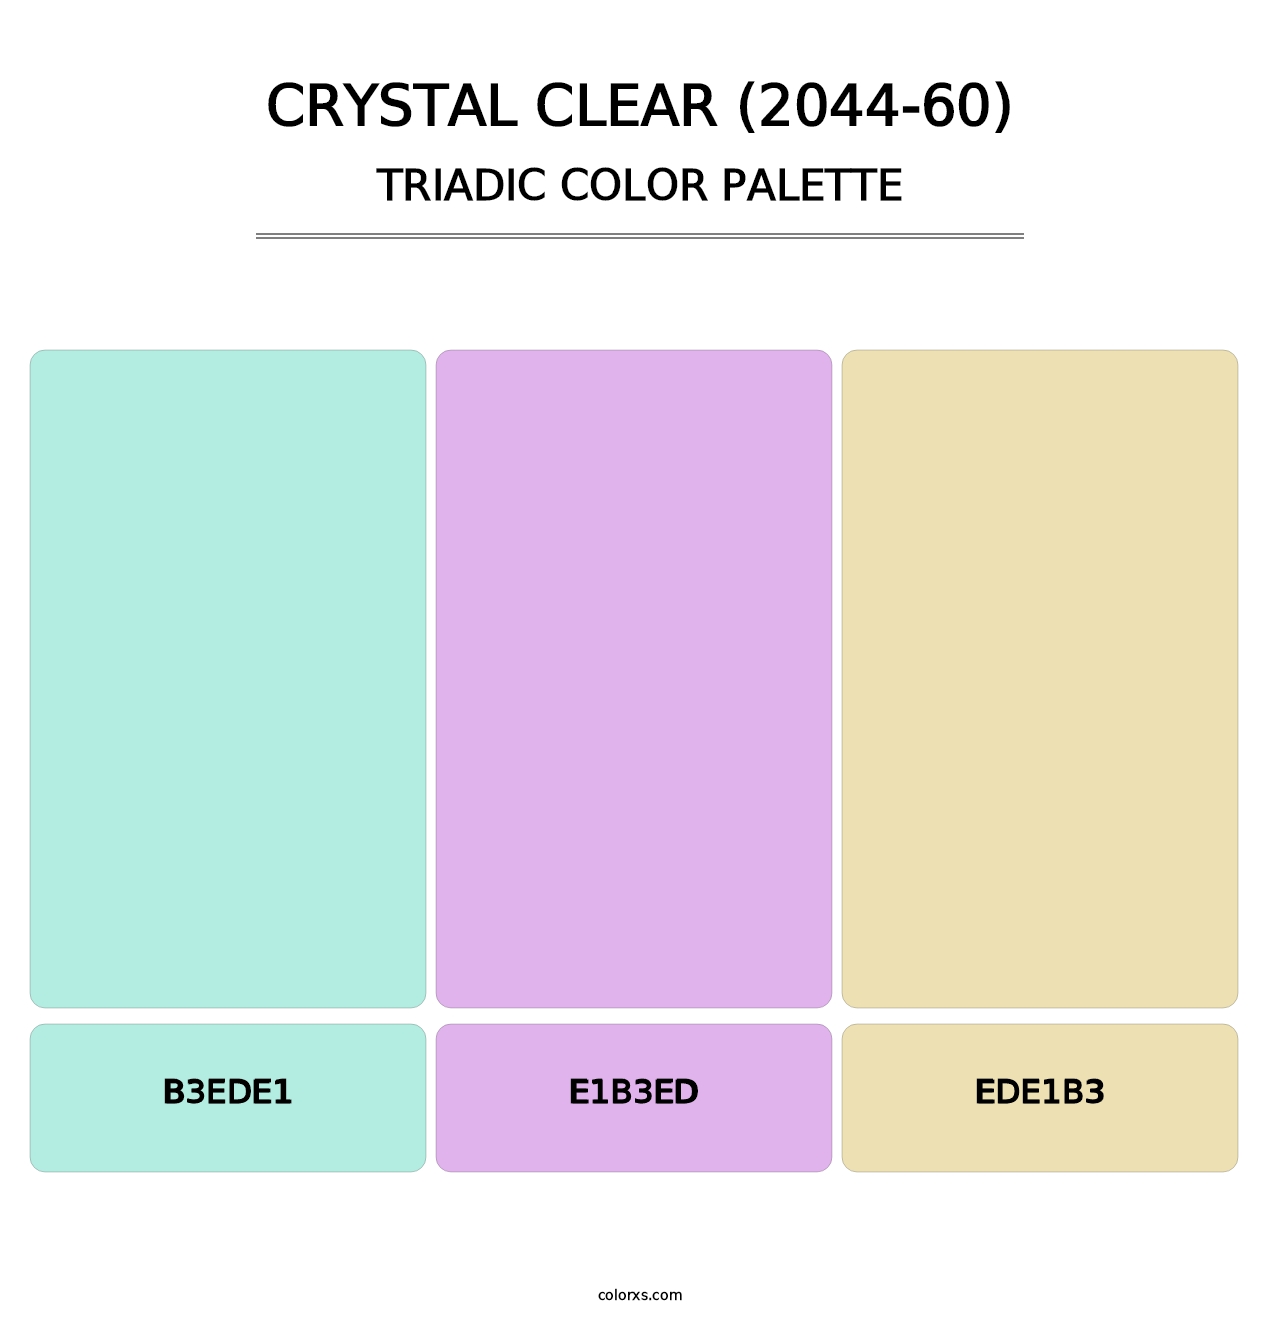 Crystal Clear (2044-60) - Triadic Color Palette